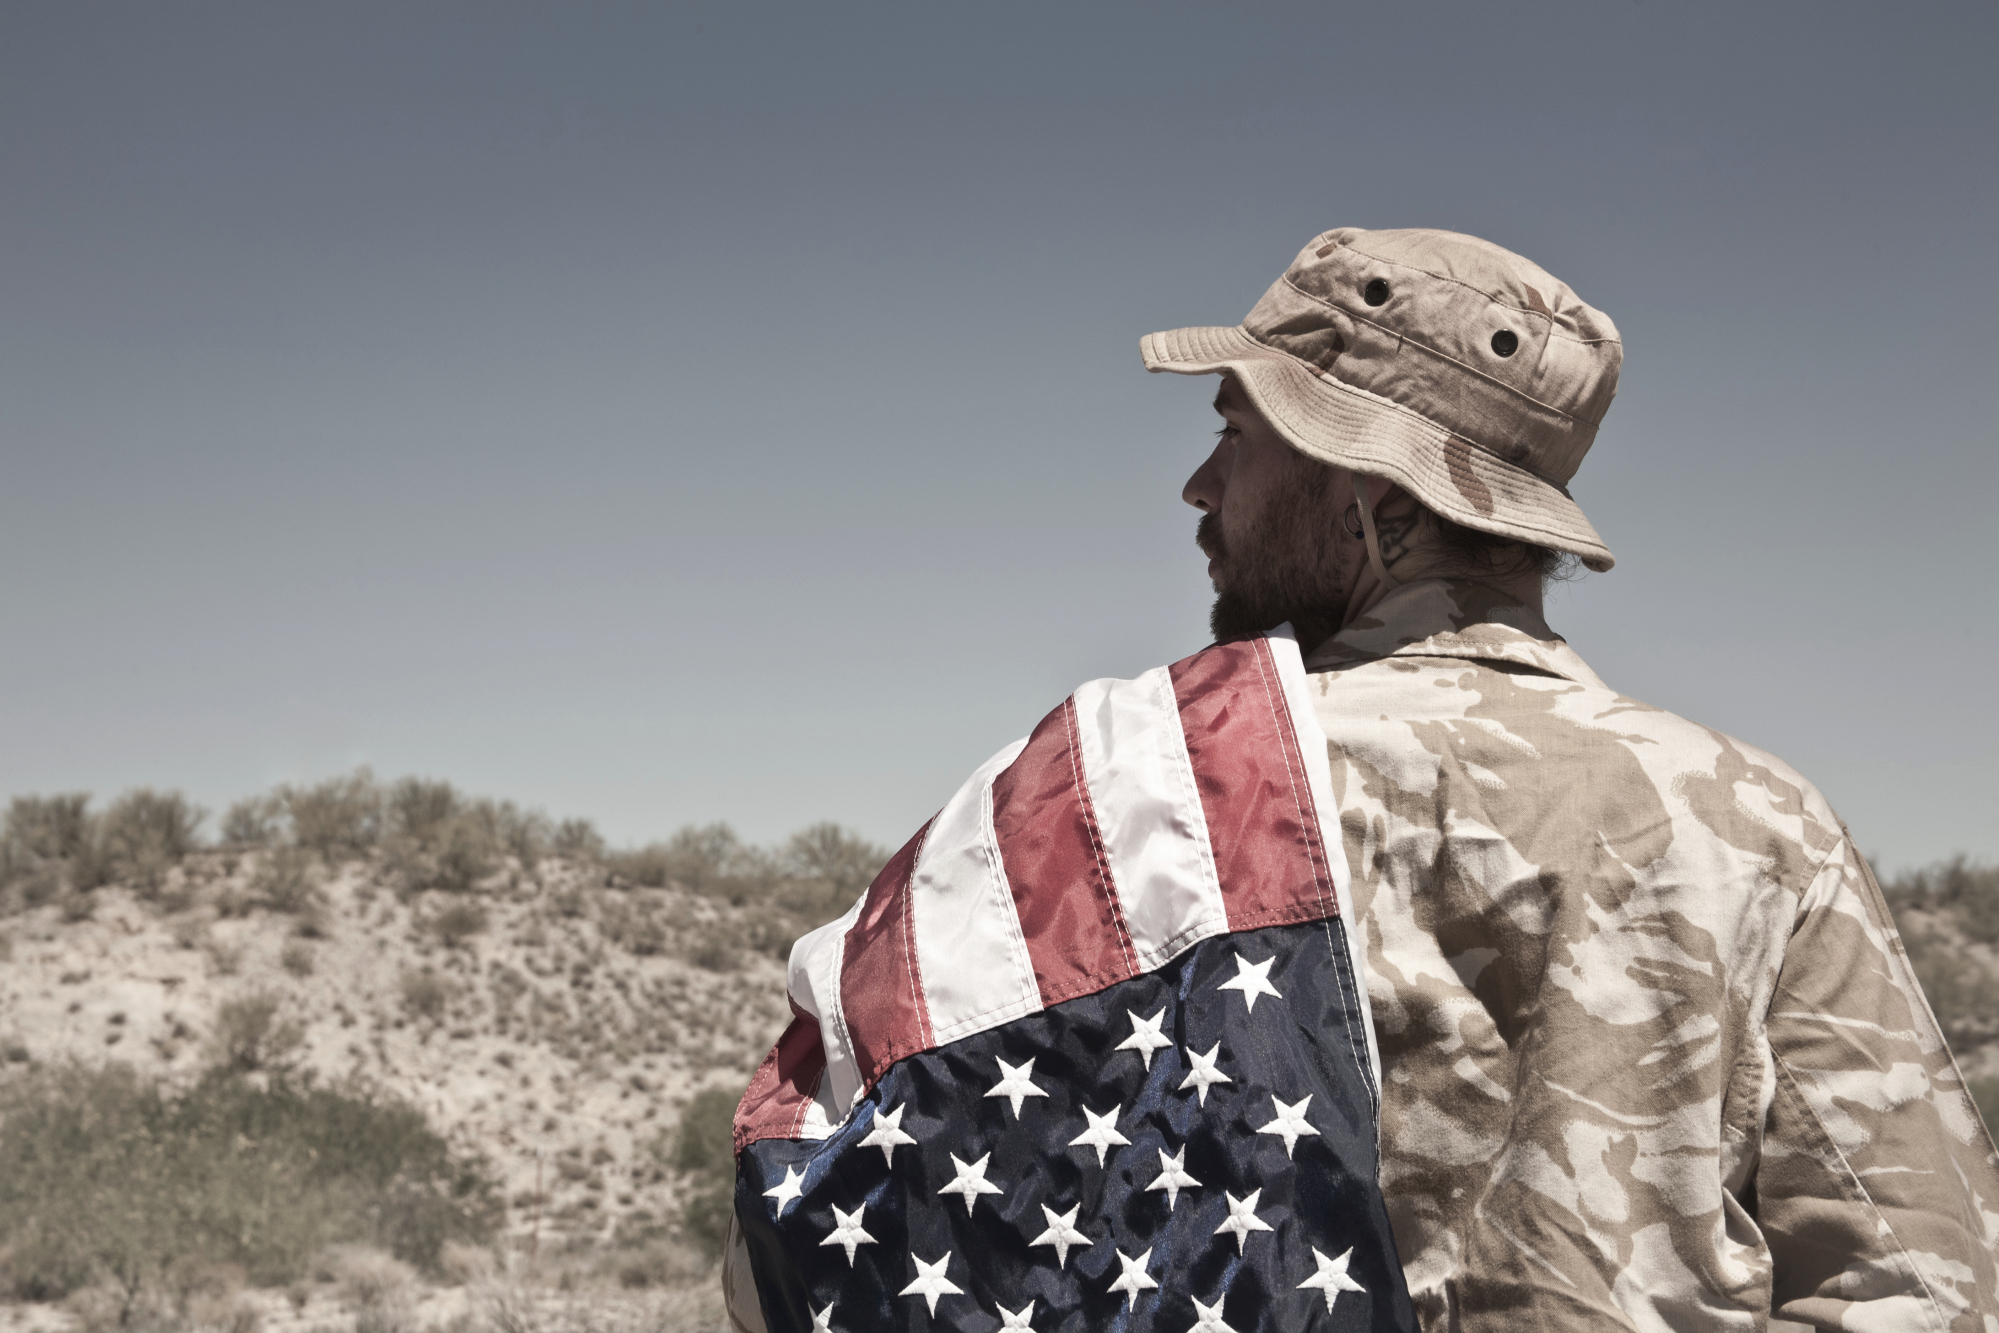 Five ways to honor our military veterans